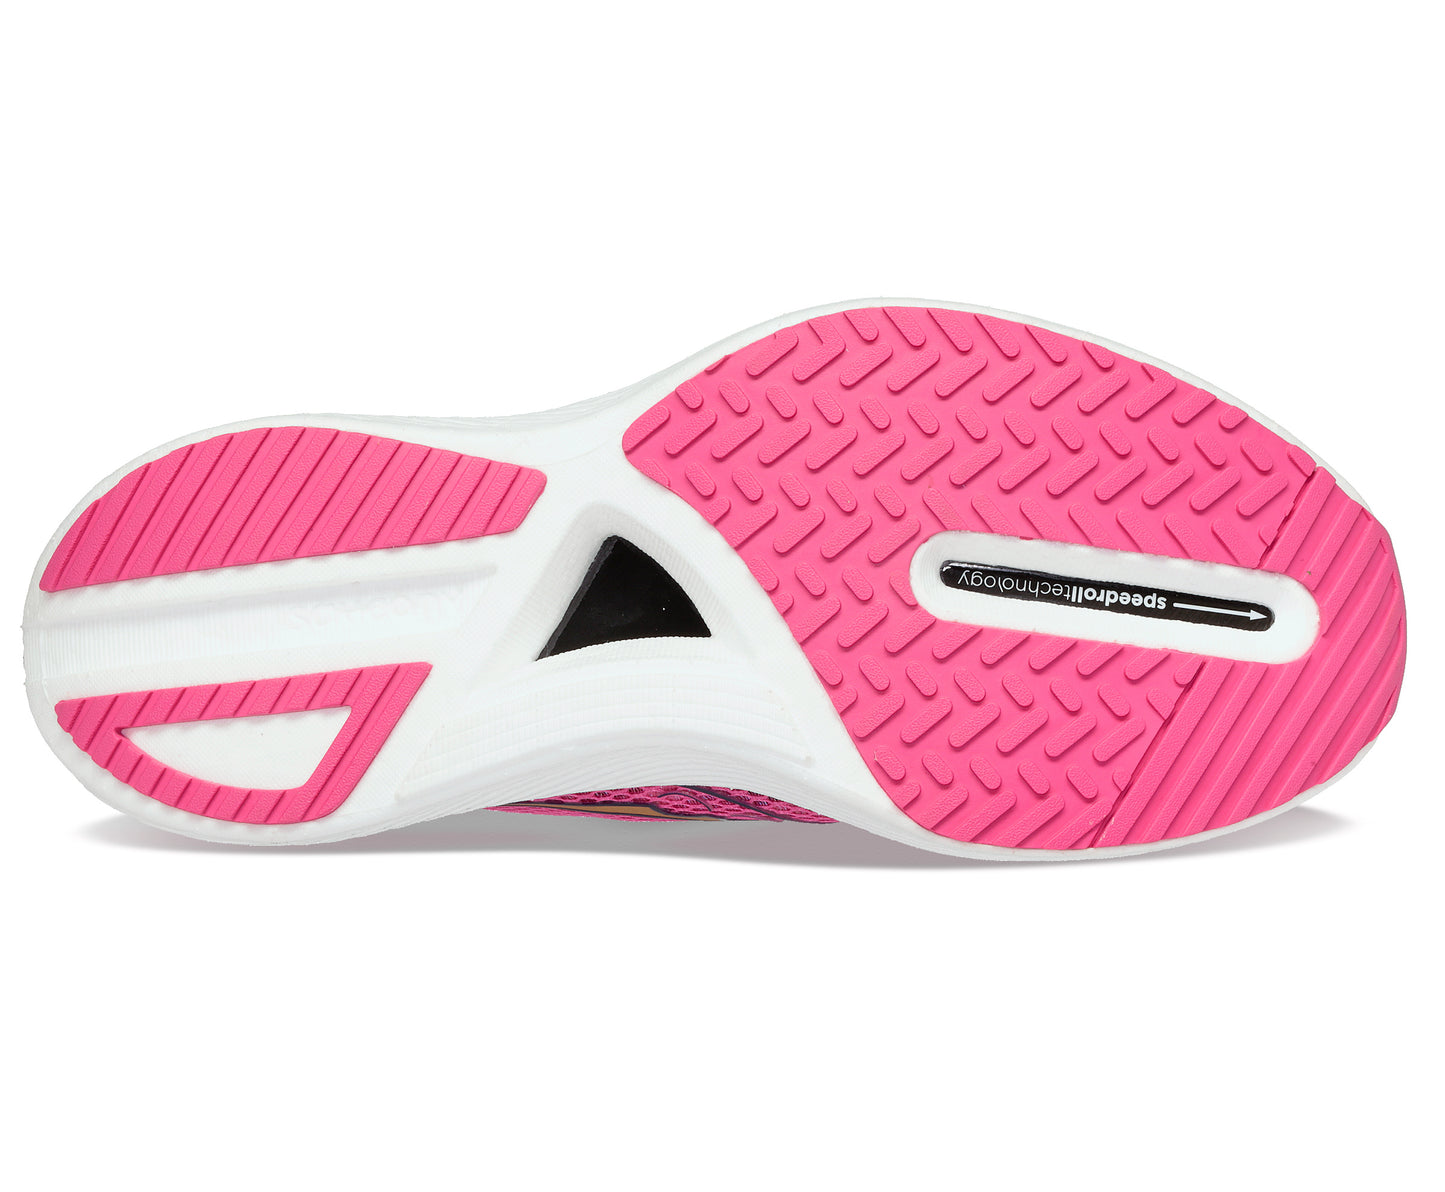 Saucony Endorphin Pro 3 carbon plate running shoe magenta, white, gold